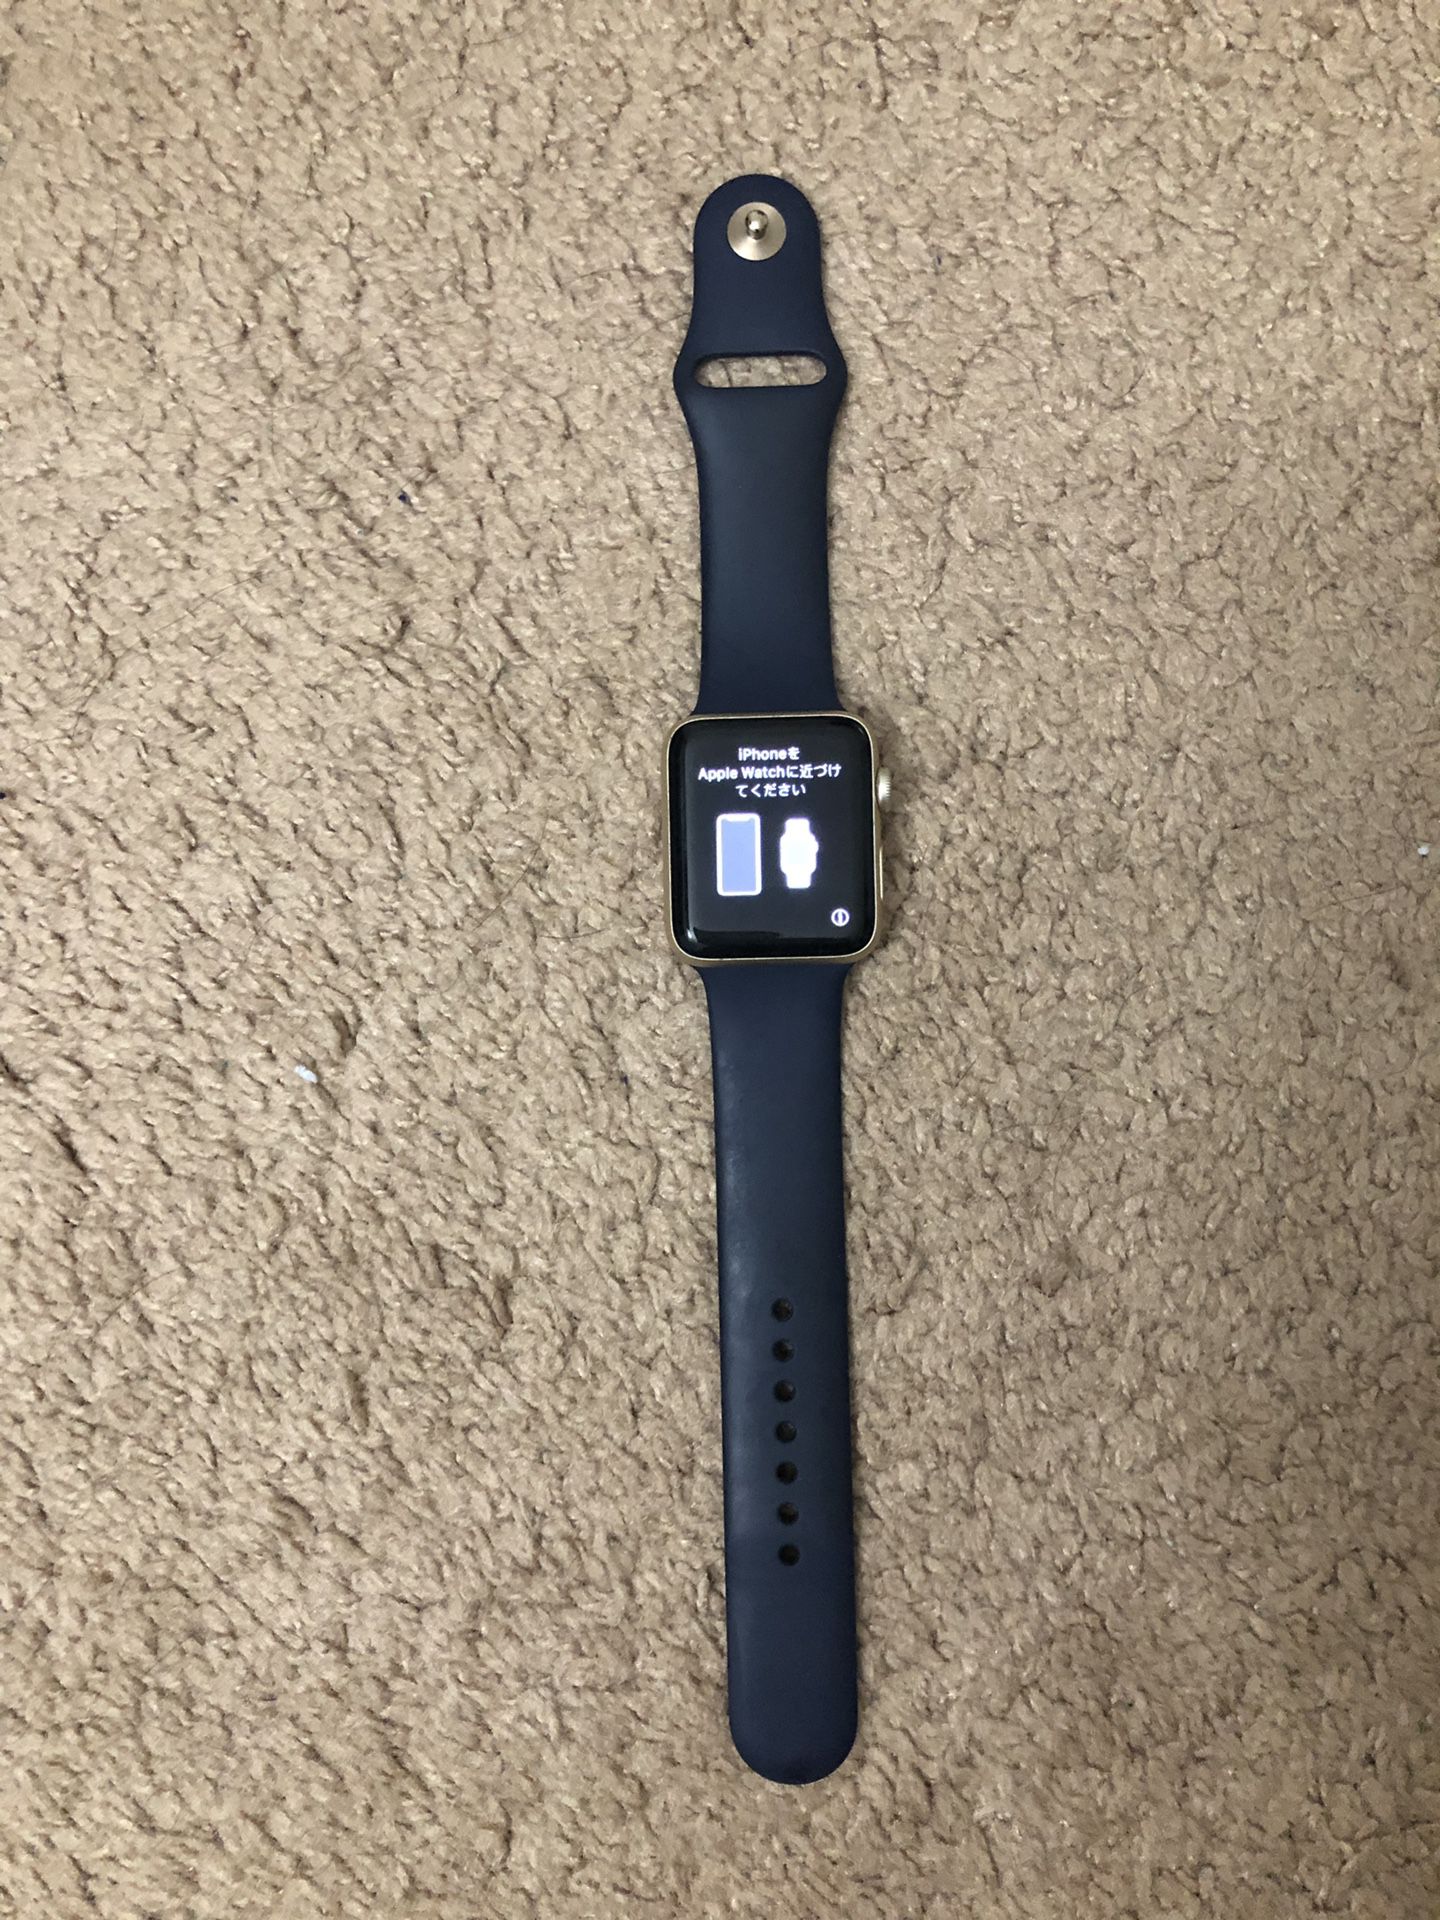 Apple Watch series 2 gold with blue sport band with charger for 130$ final price.